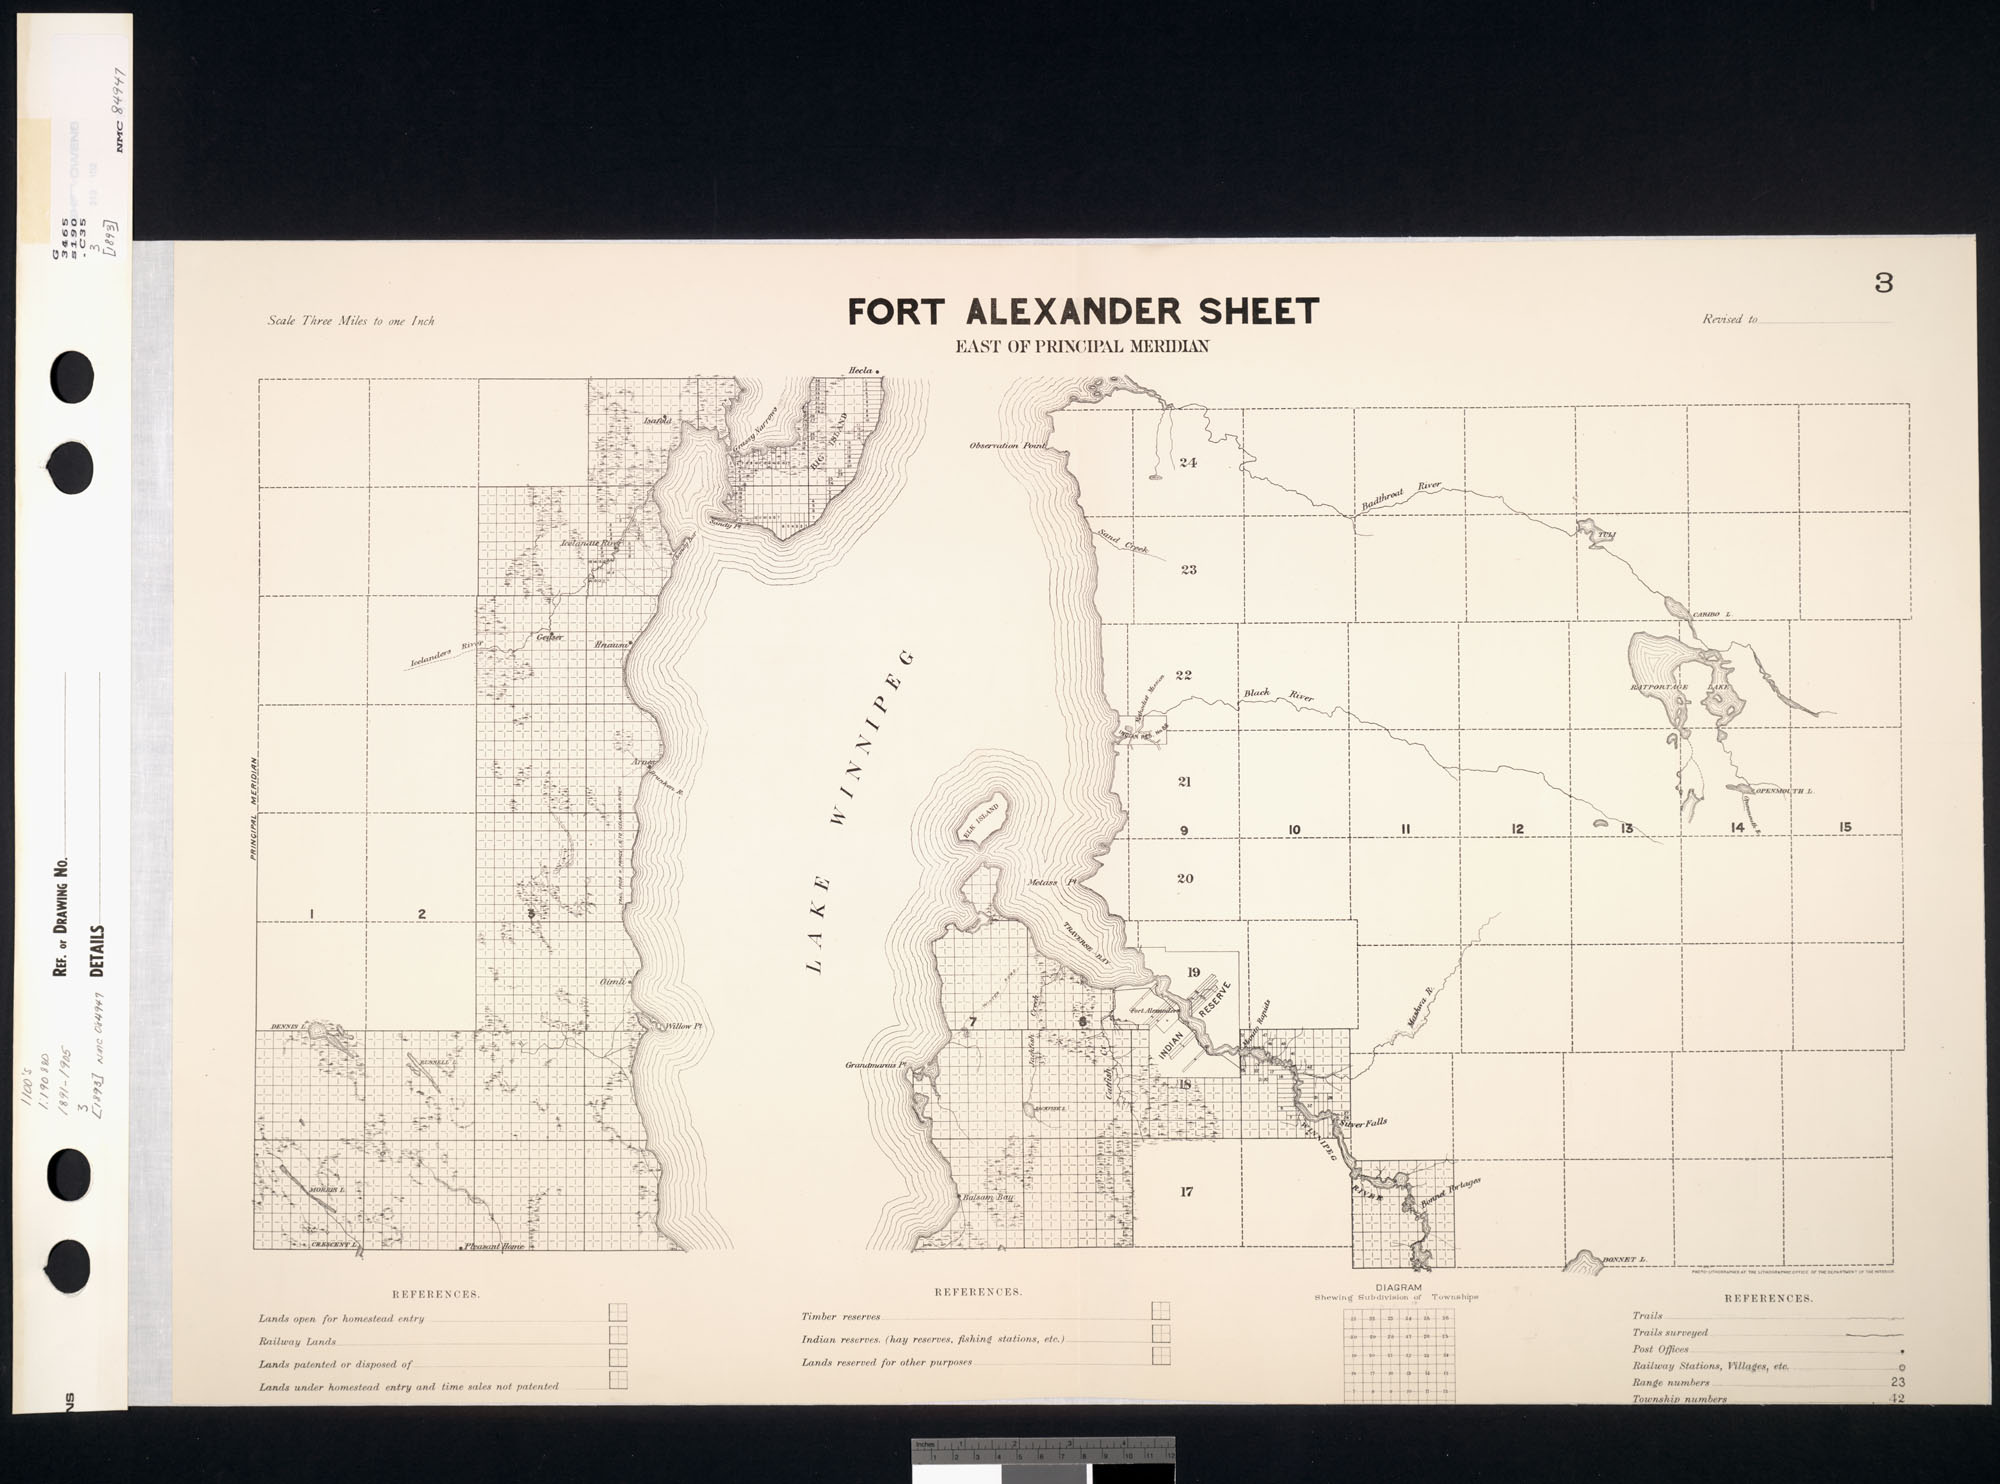 Digitized image of map no. 3, Fort Alexander, east of principal meridian, MIKAN 3696120, image number e002419250